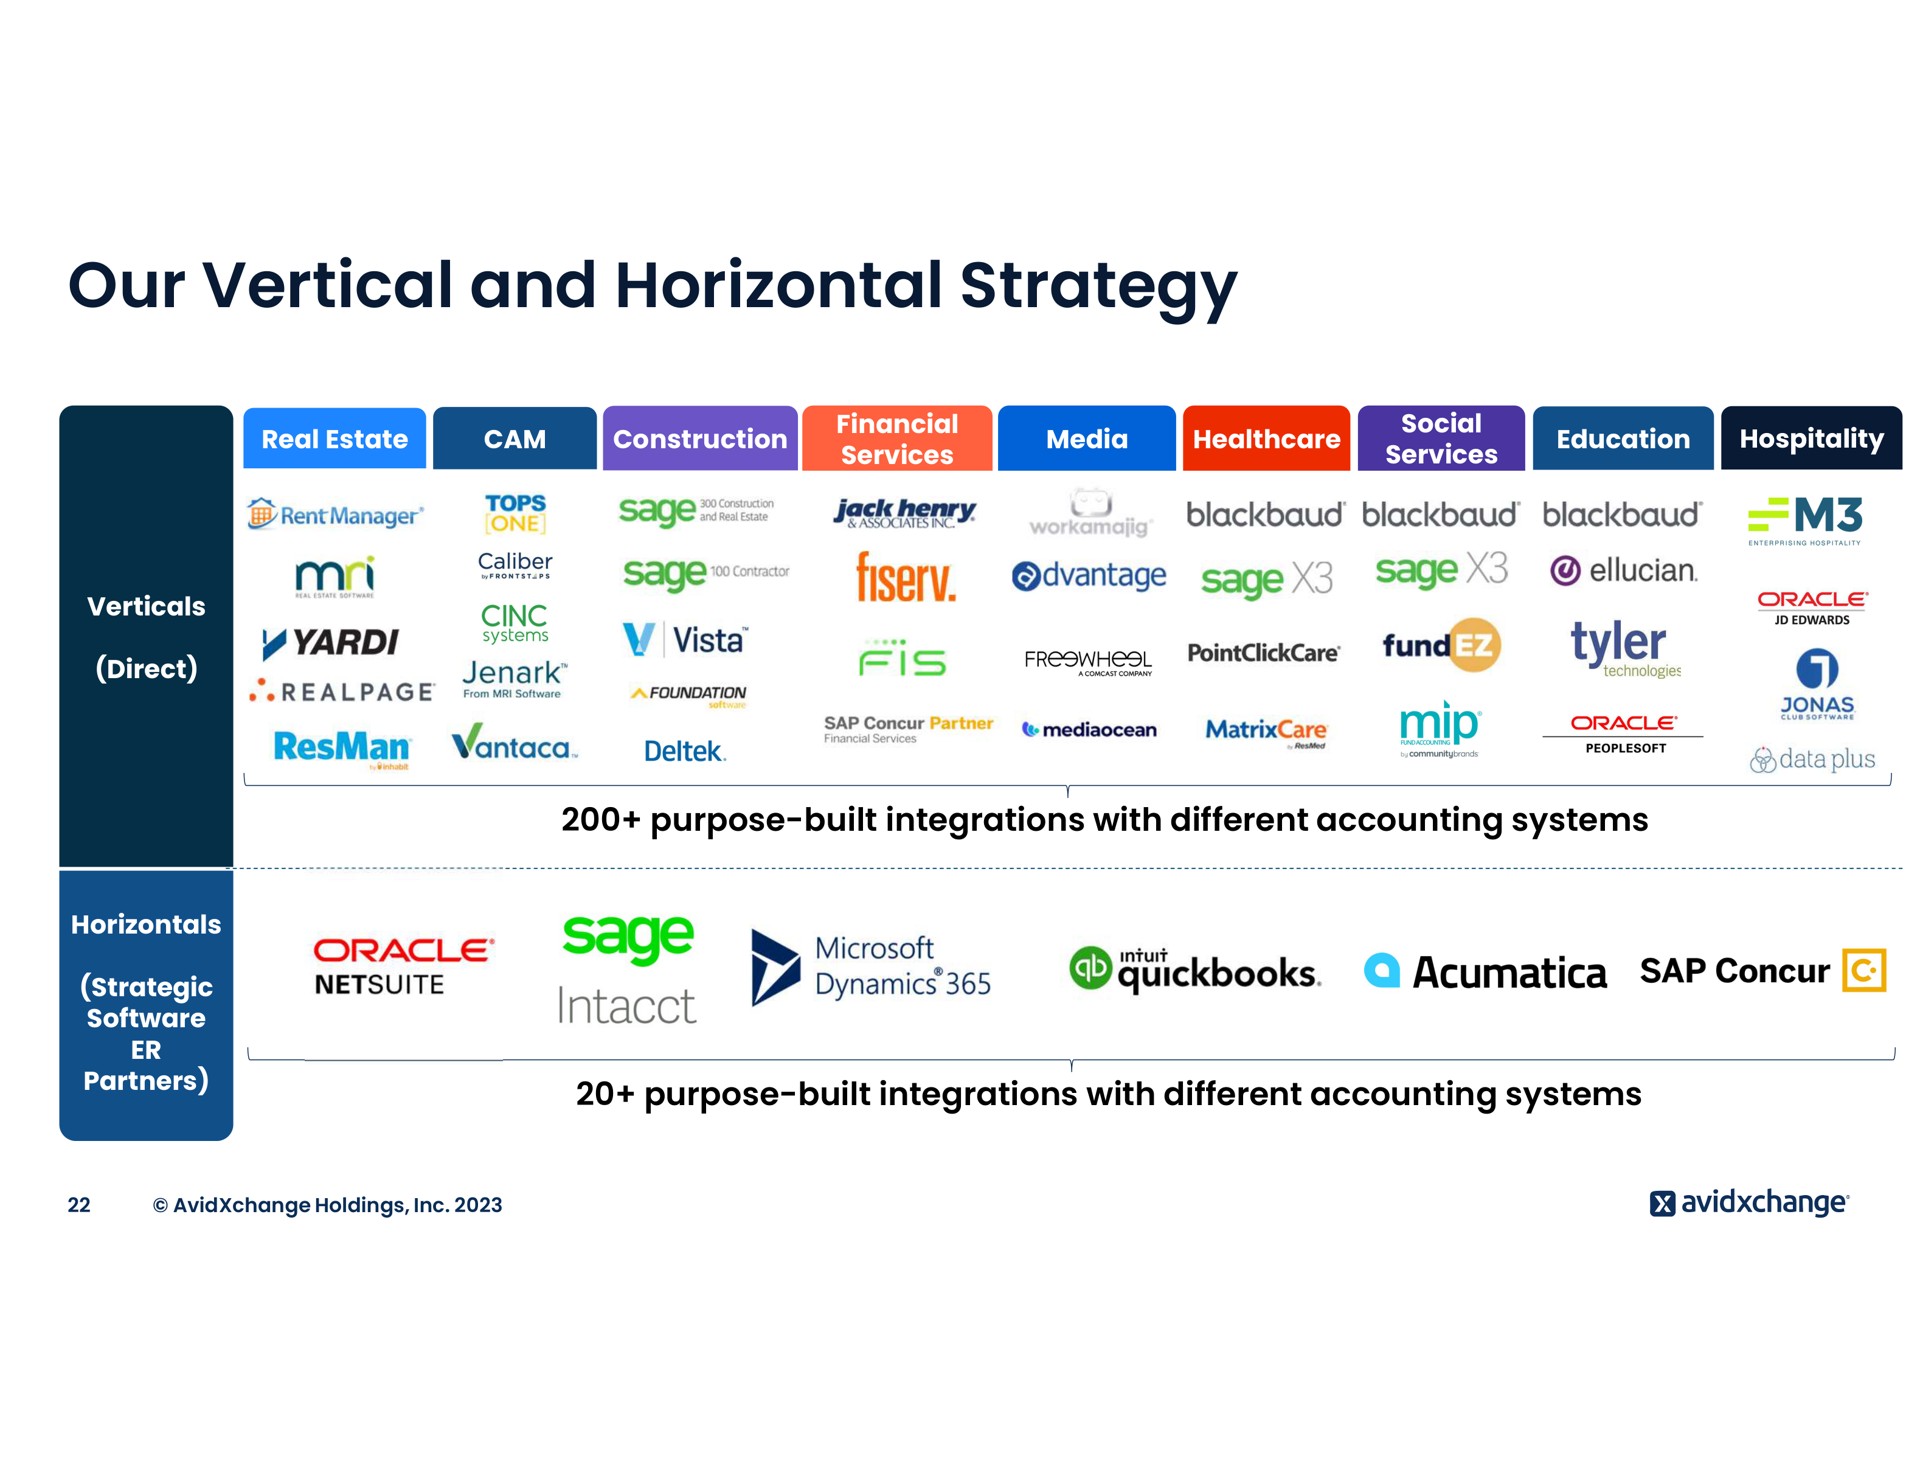 our vertical and horizontal strategy sages ficary | AvidXchange